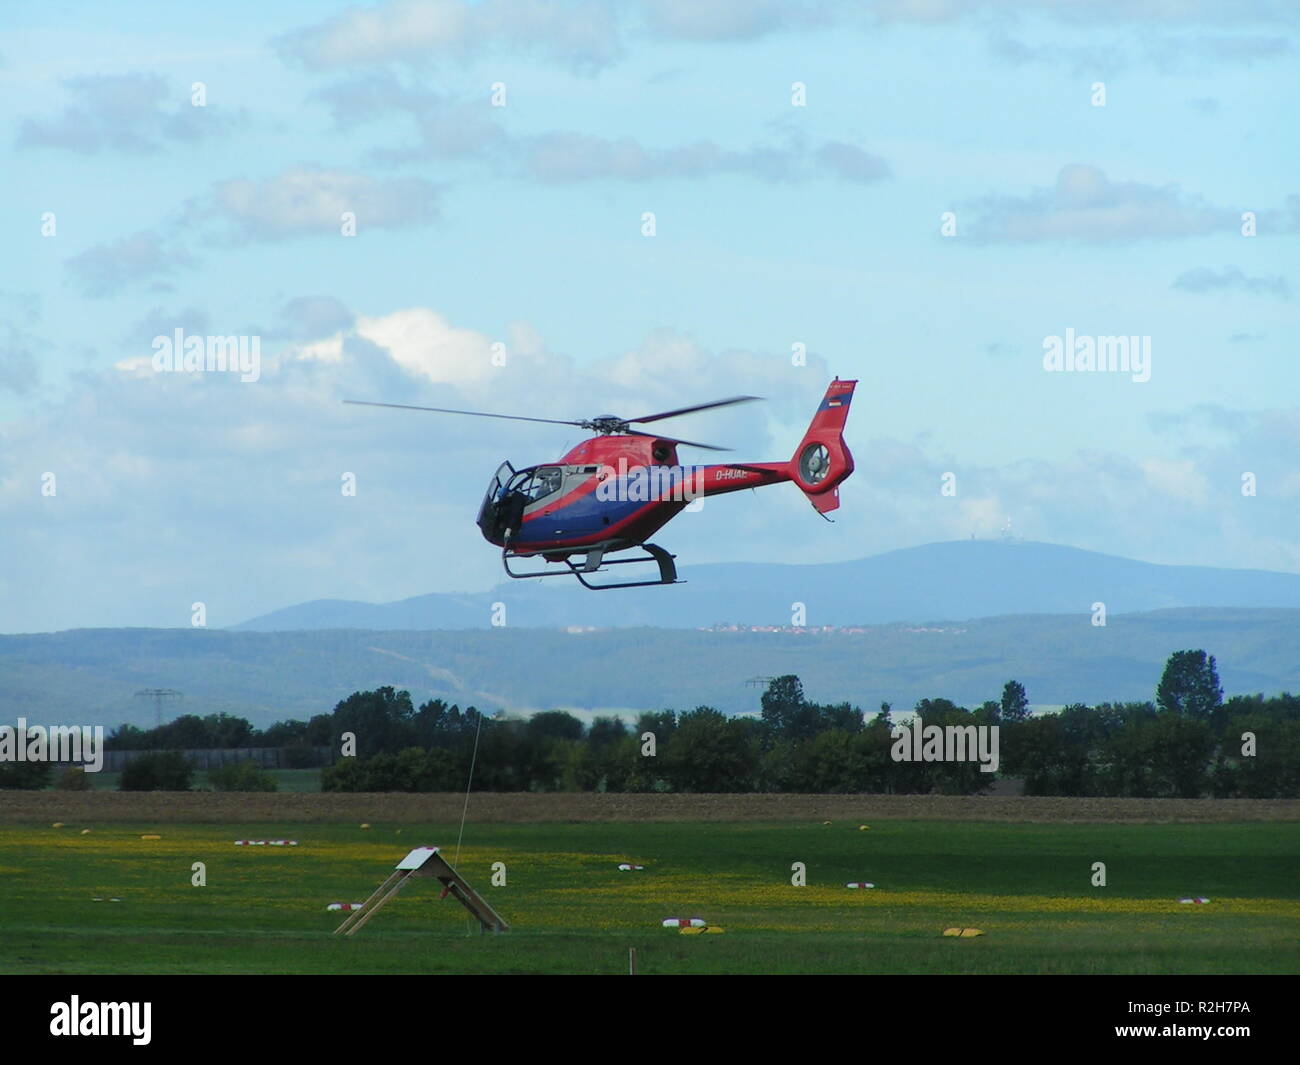 Fluga High Resolution Stock Photography and Images - Alamy